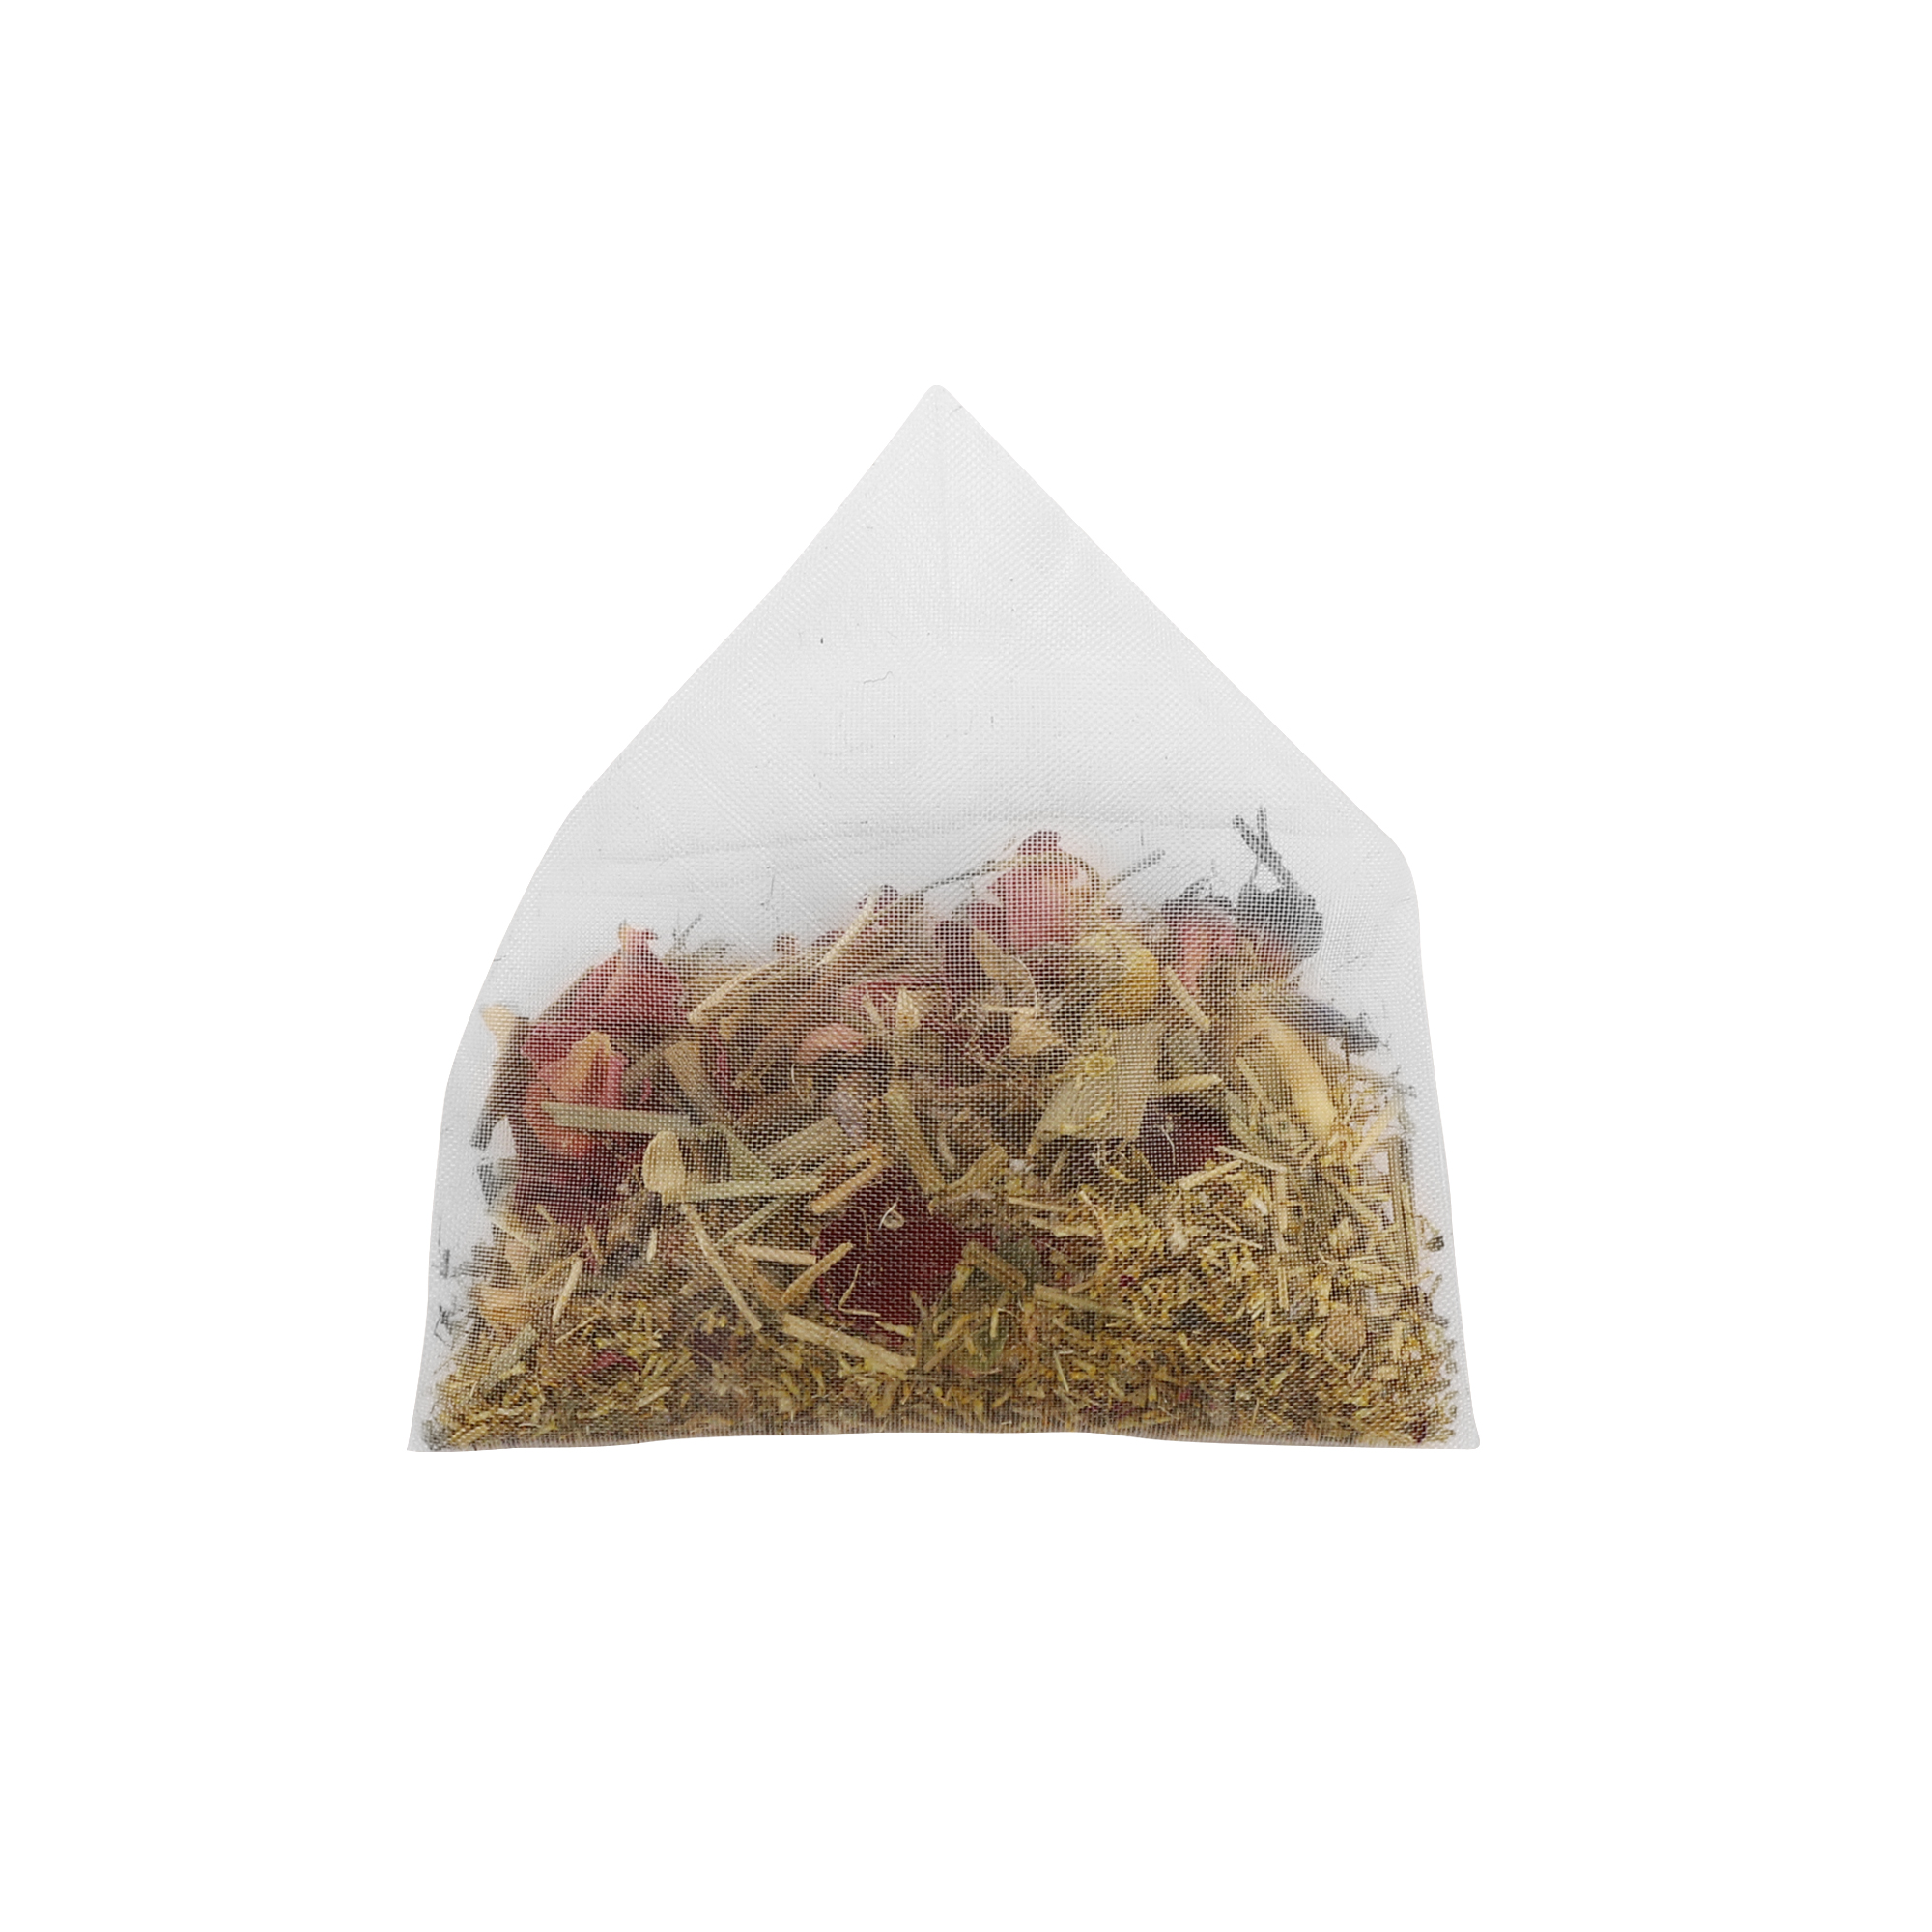 Product: Wholly Being Anxiety Relief Tea Bags